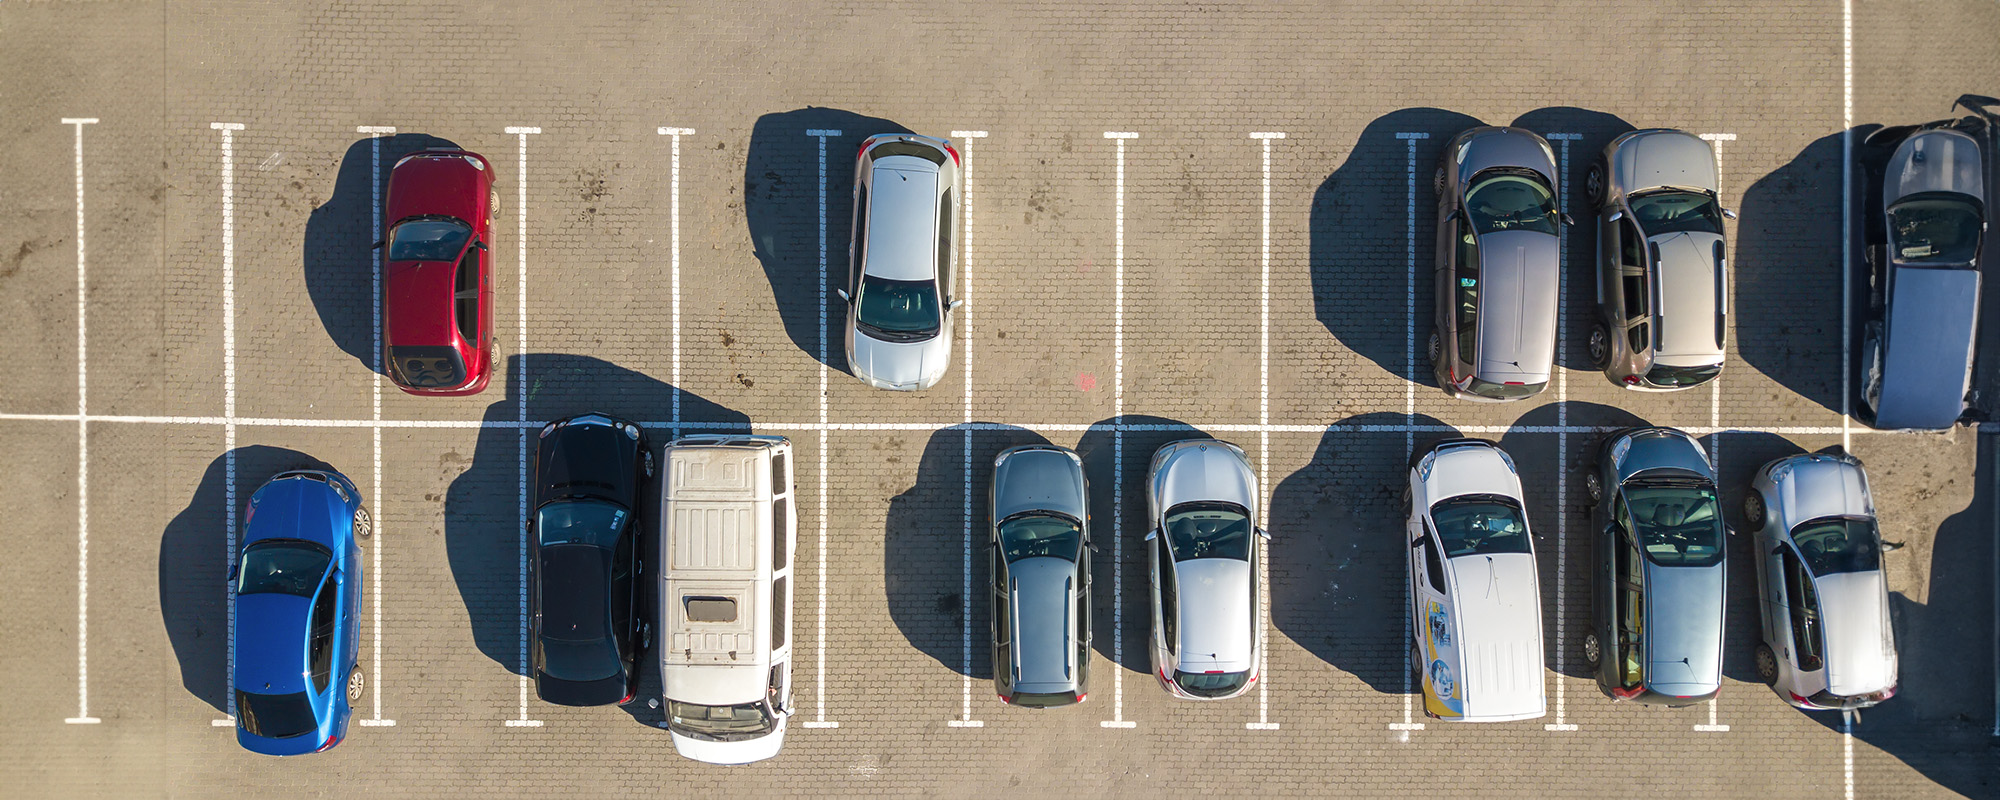 aerial view of many colorful cars parked on parking lot with lines and markings for parking places and directions